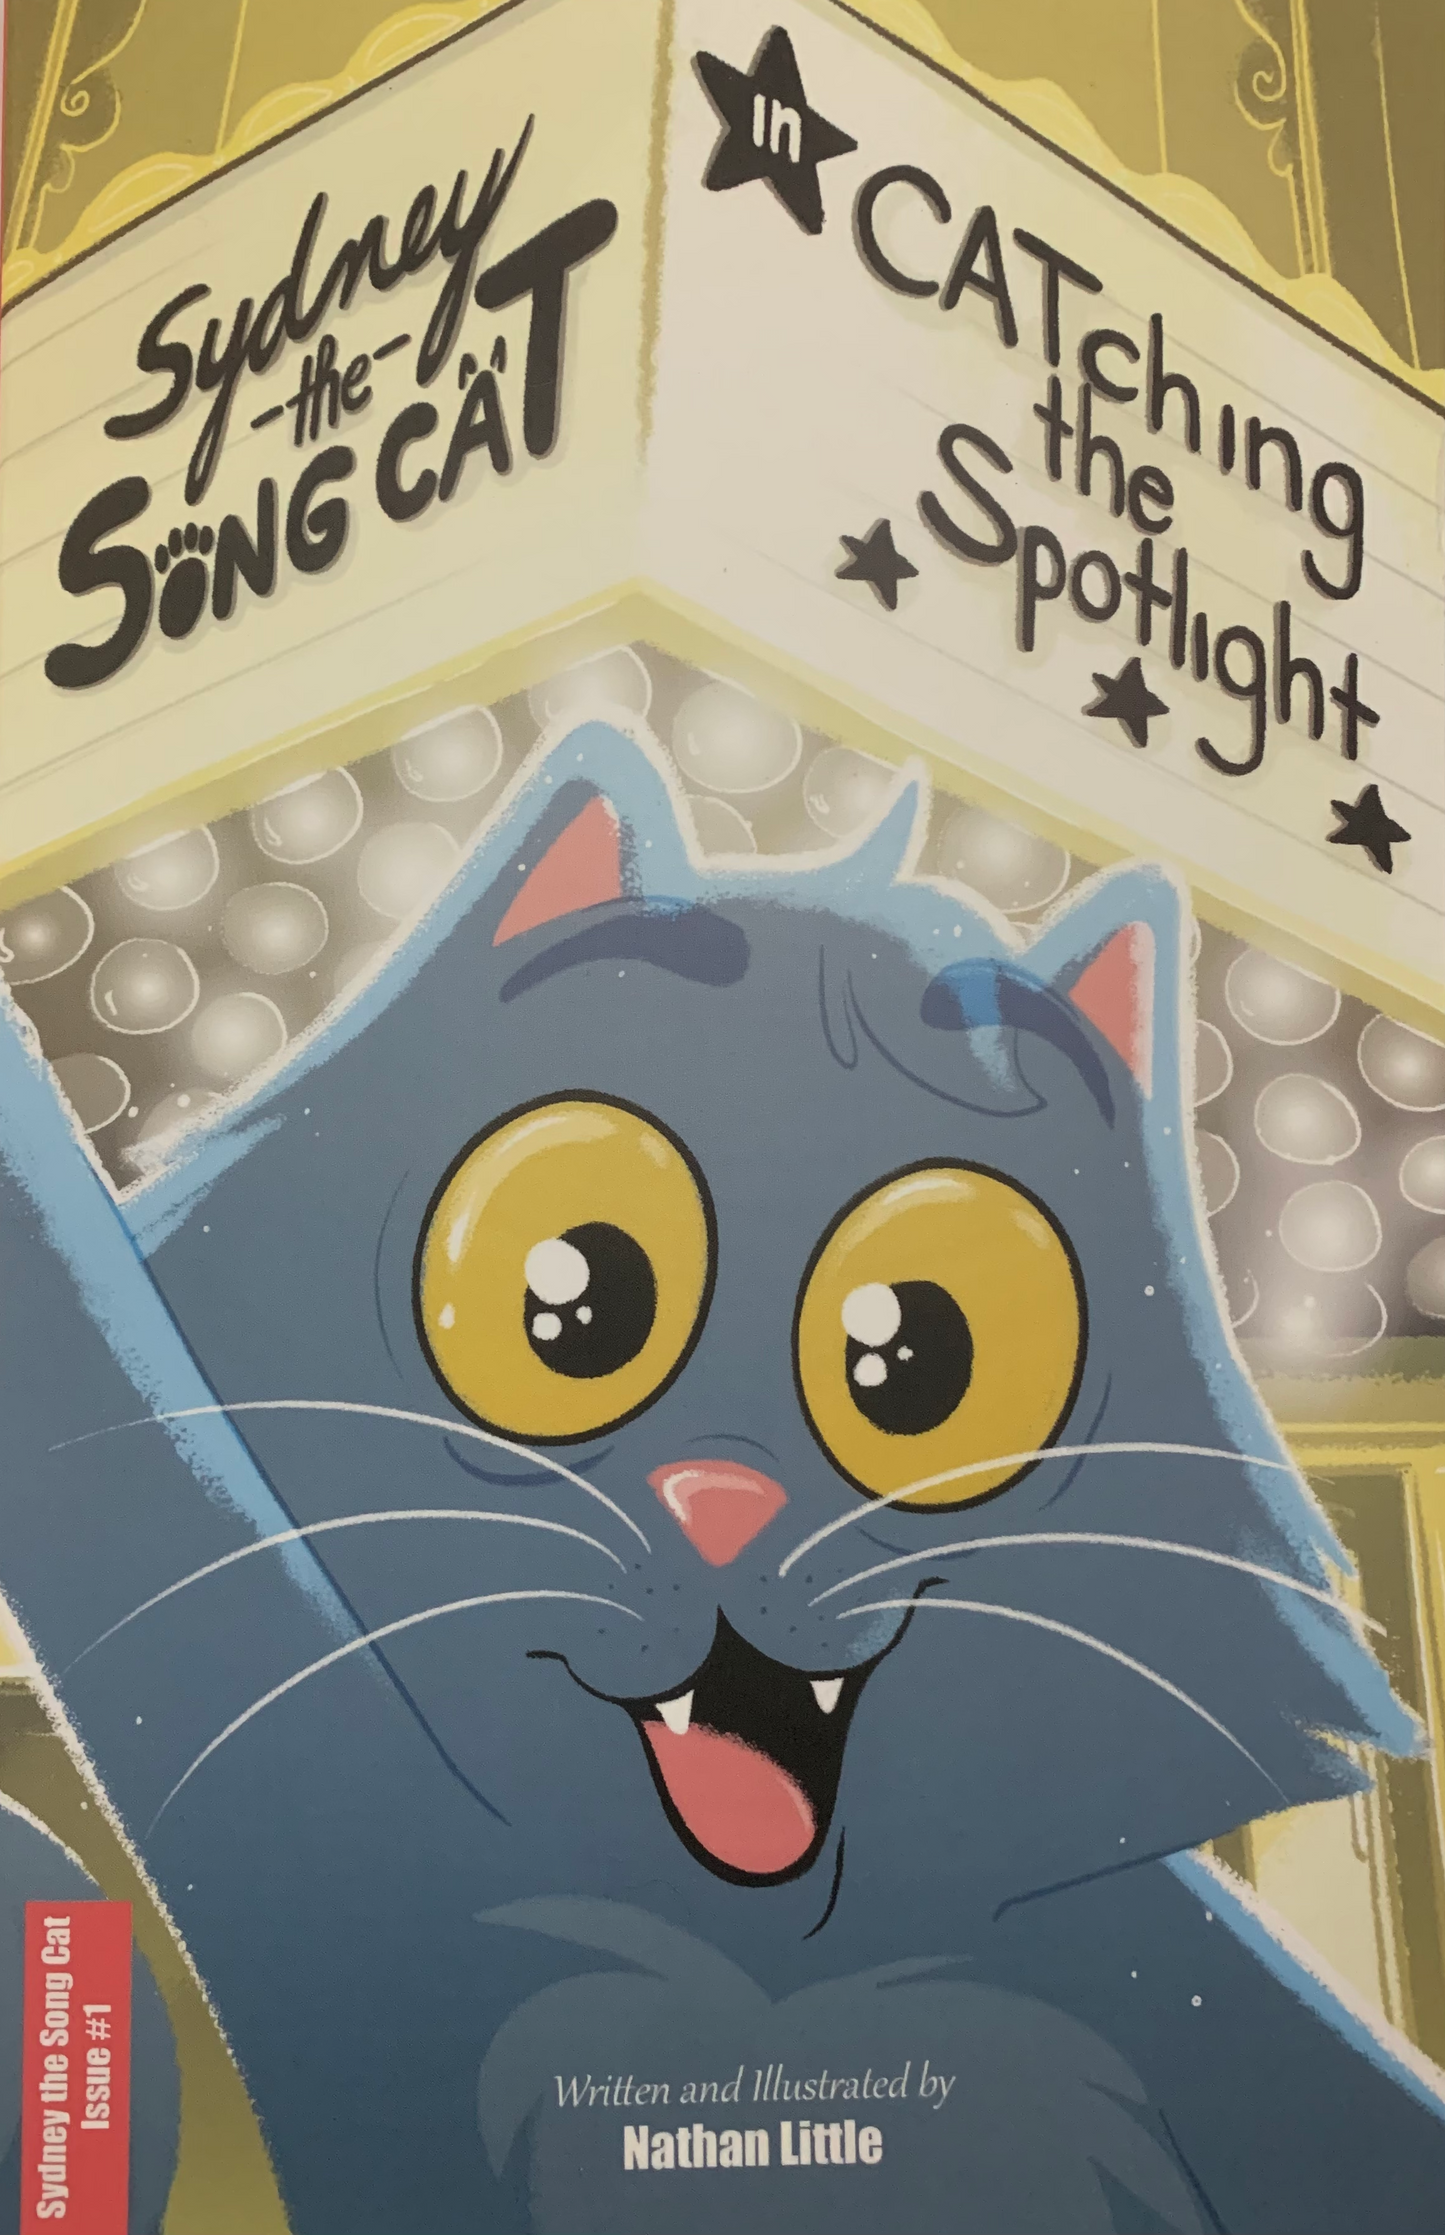 Sydney the Song Cat: CATching the Spotlight